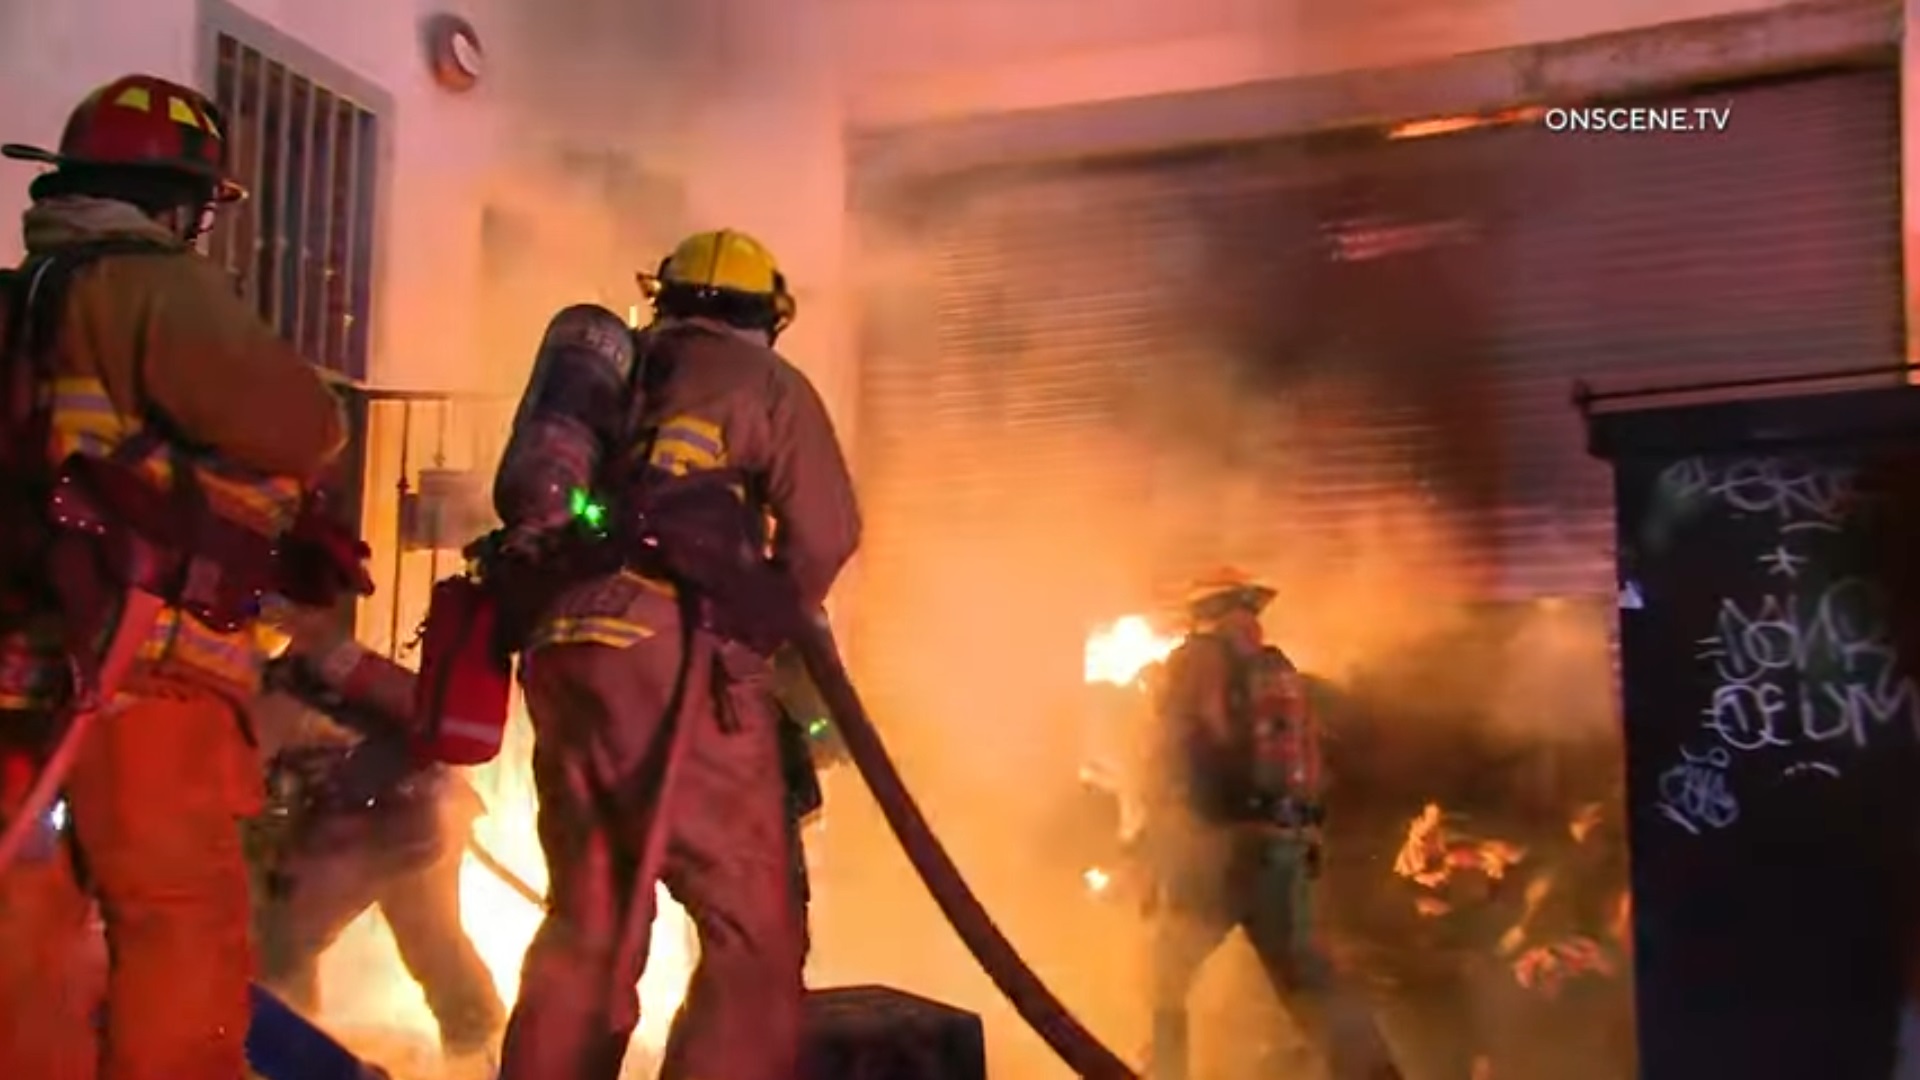 Early video: Trash fire extends to Los Angeles building